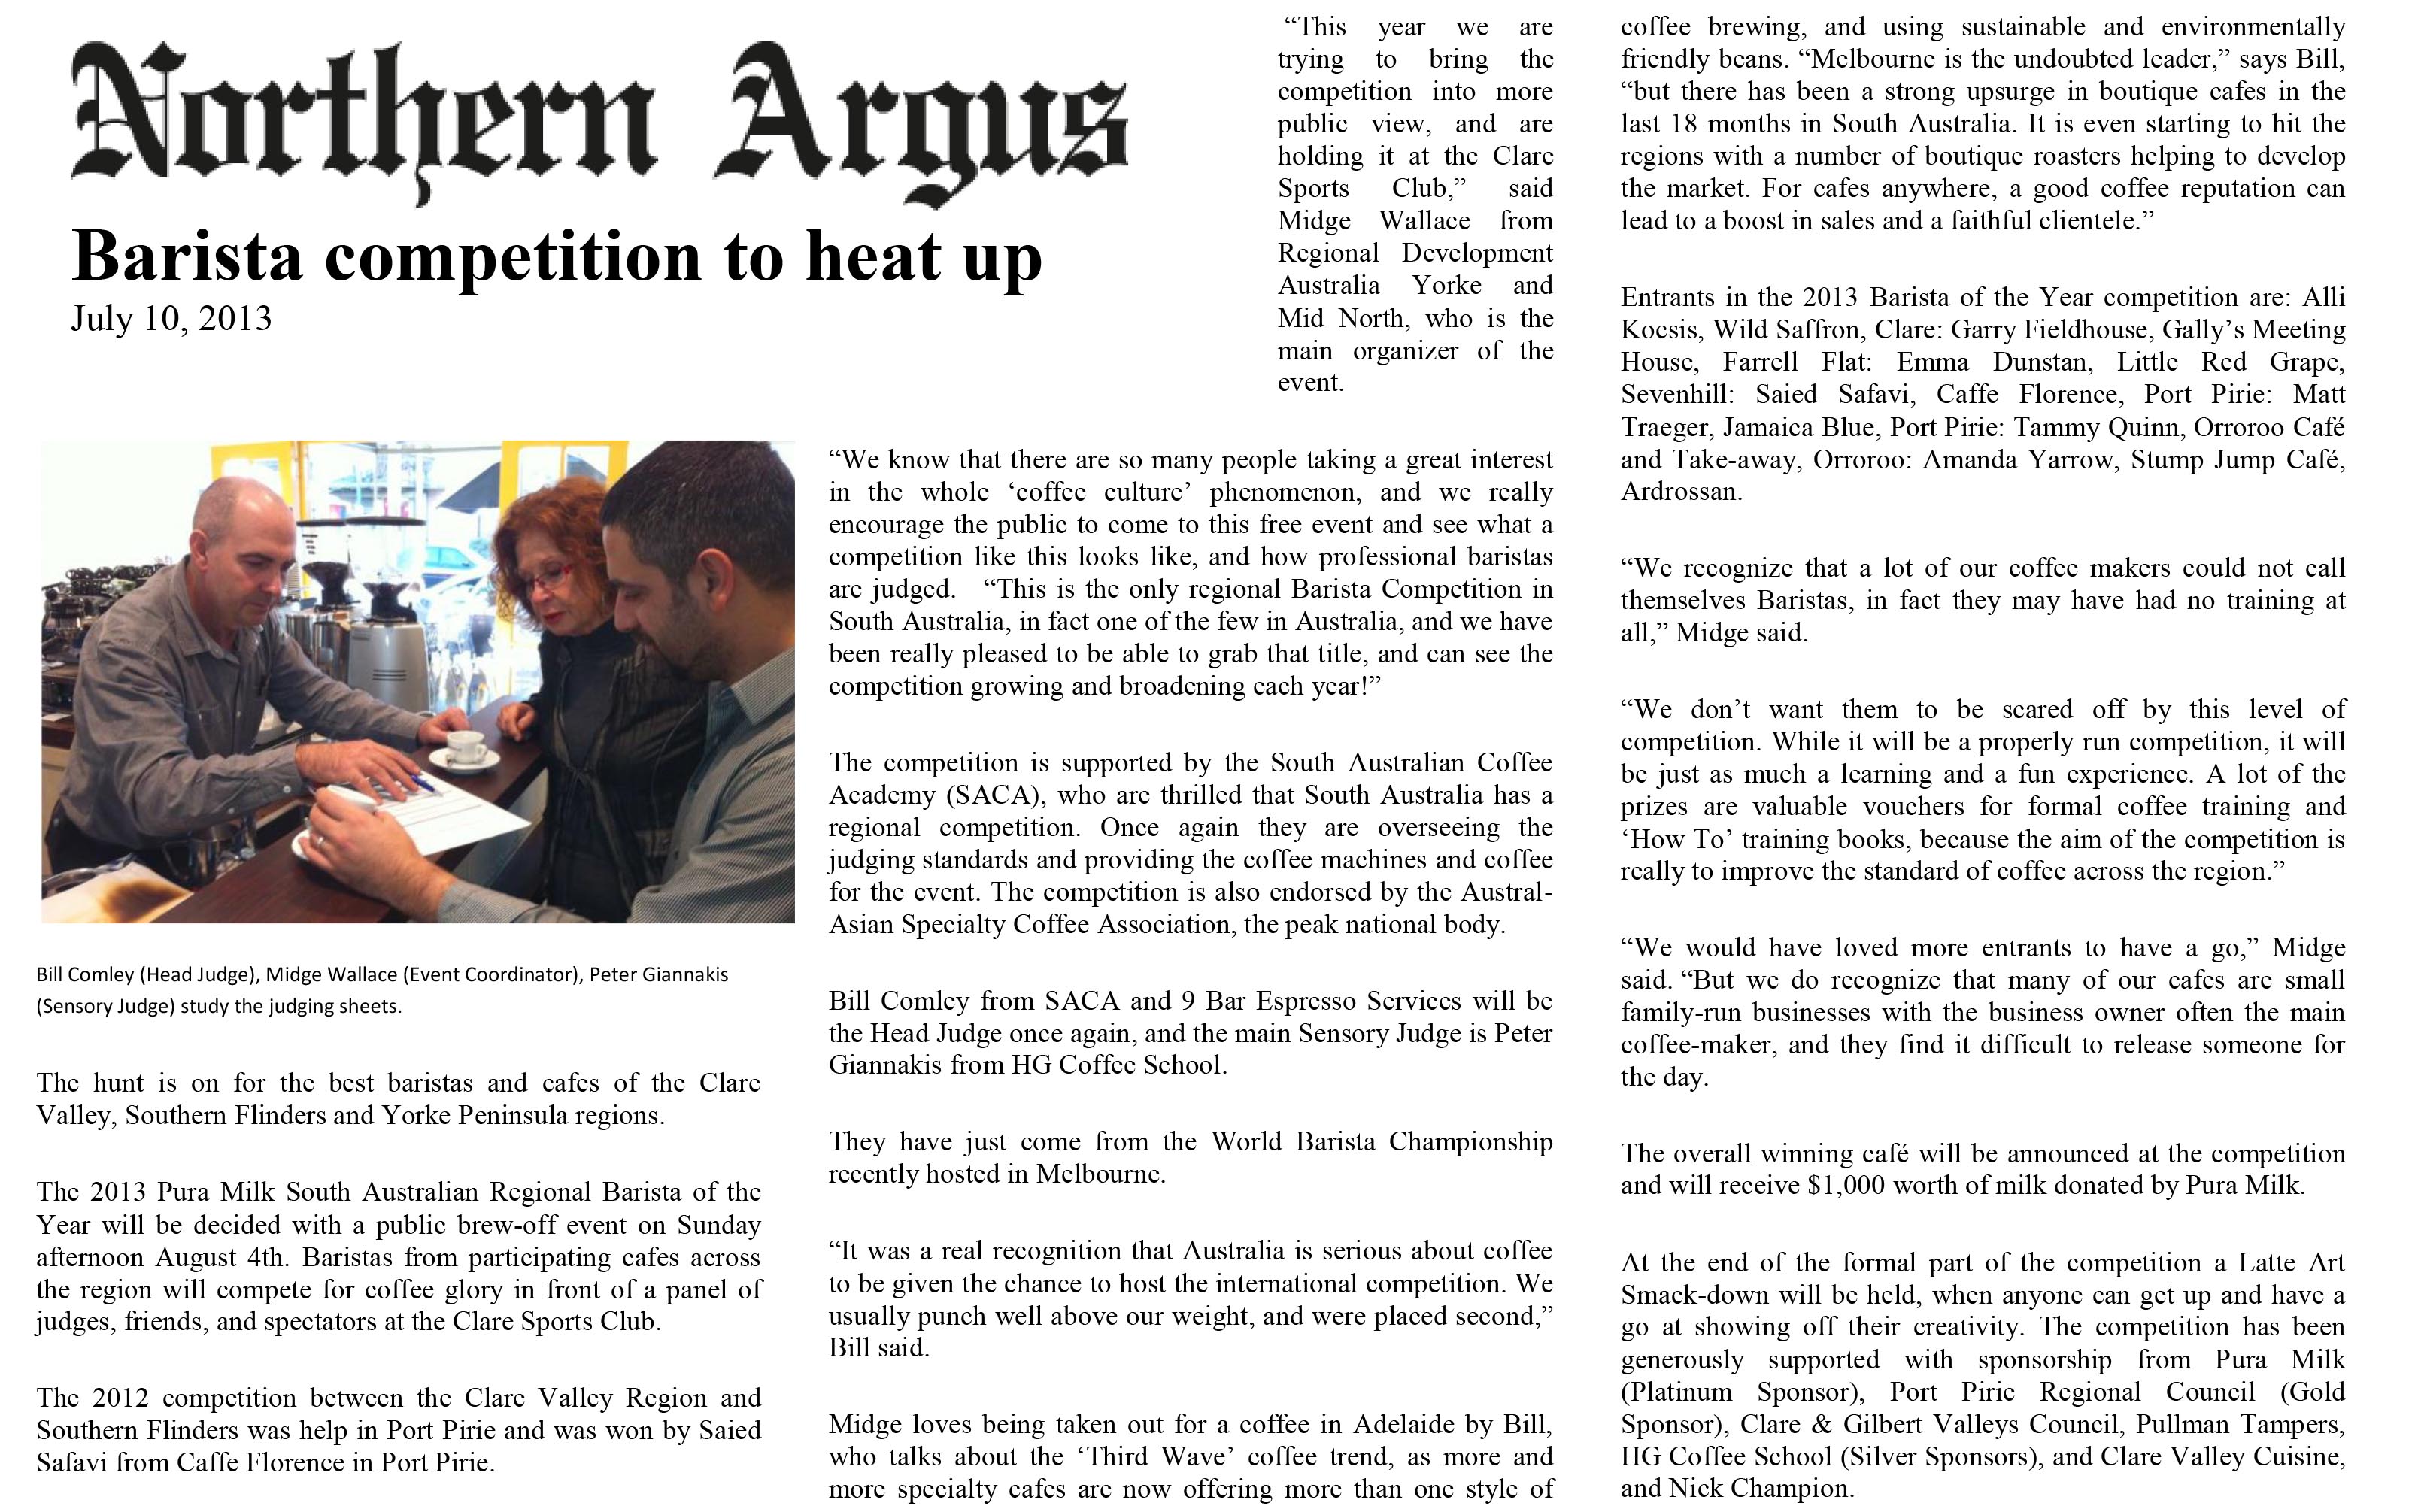 Northern Argus Feature